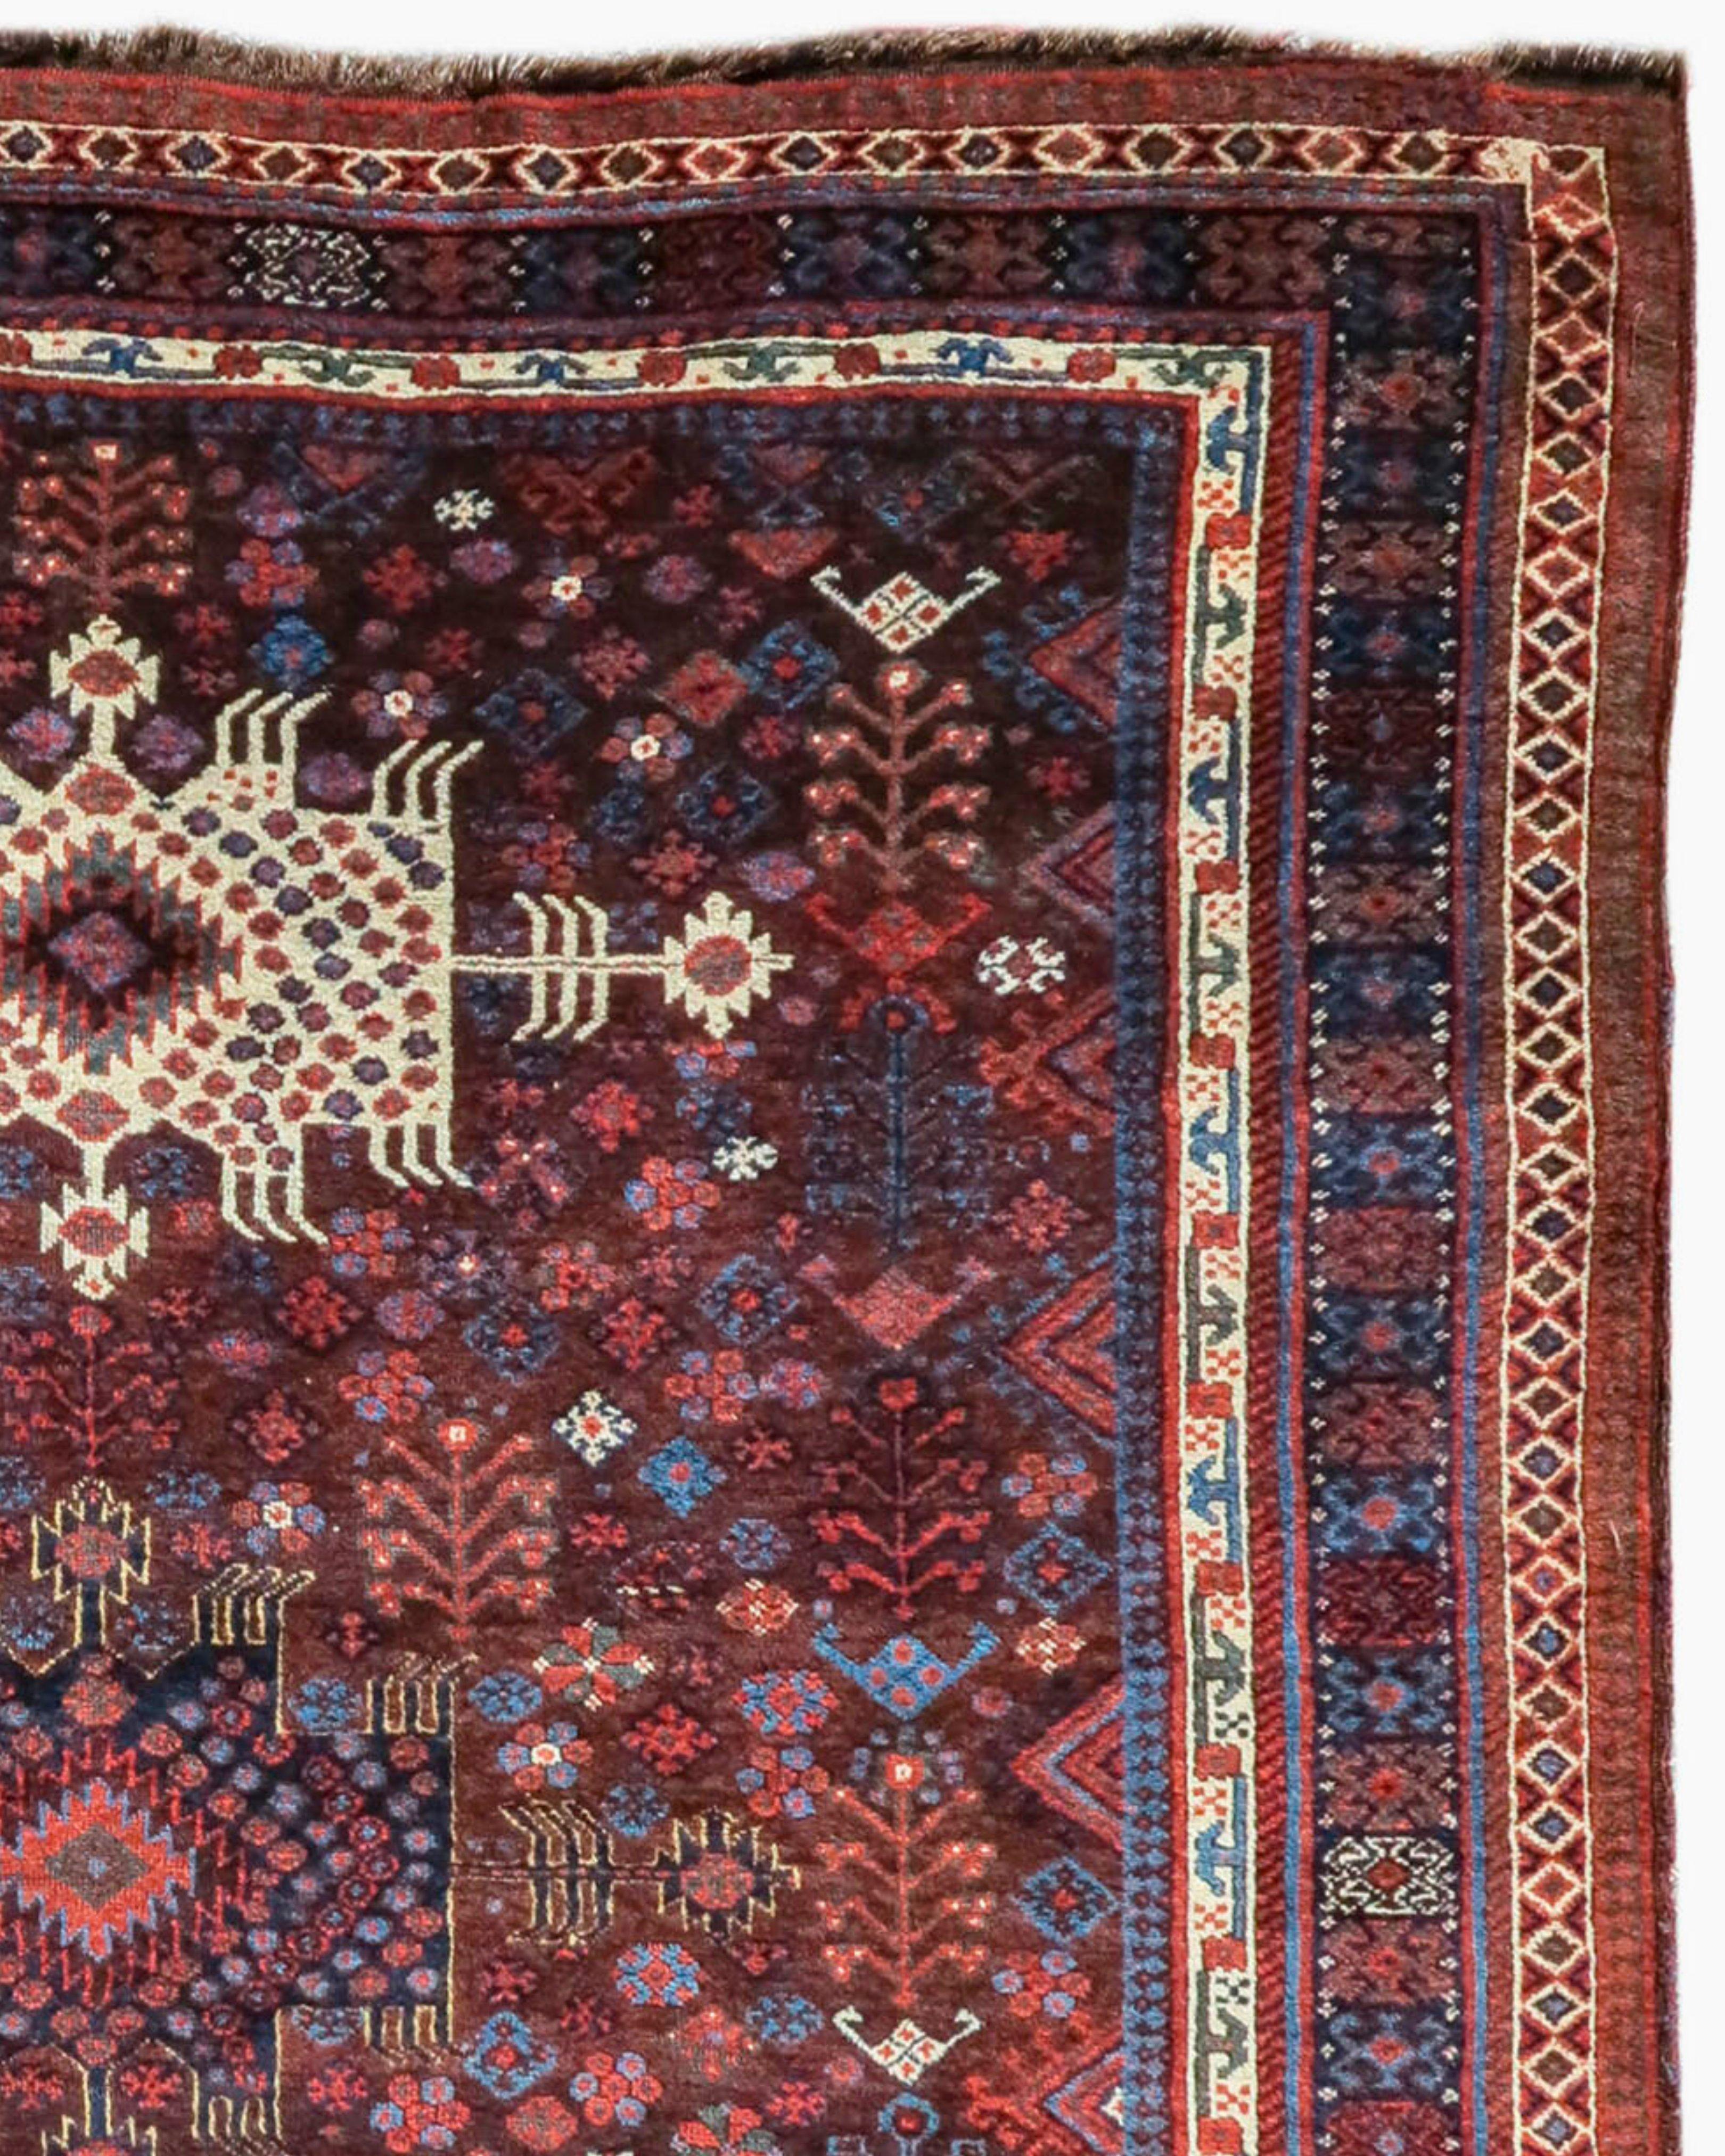 Antique Southwest Persian Luri Rug, 19th Century

Additional Information:
Dimensions: 5'6